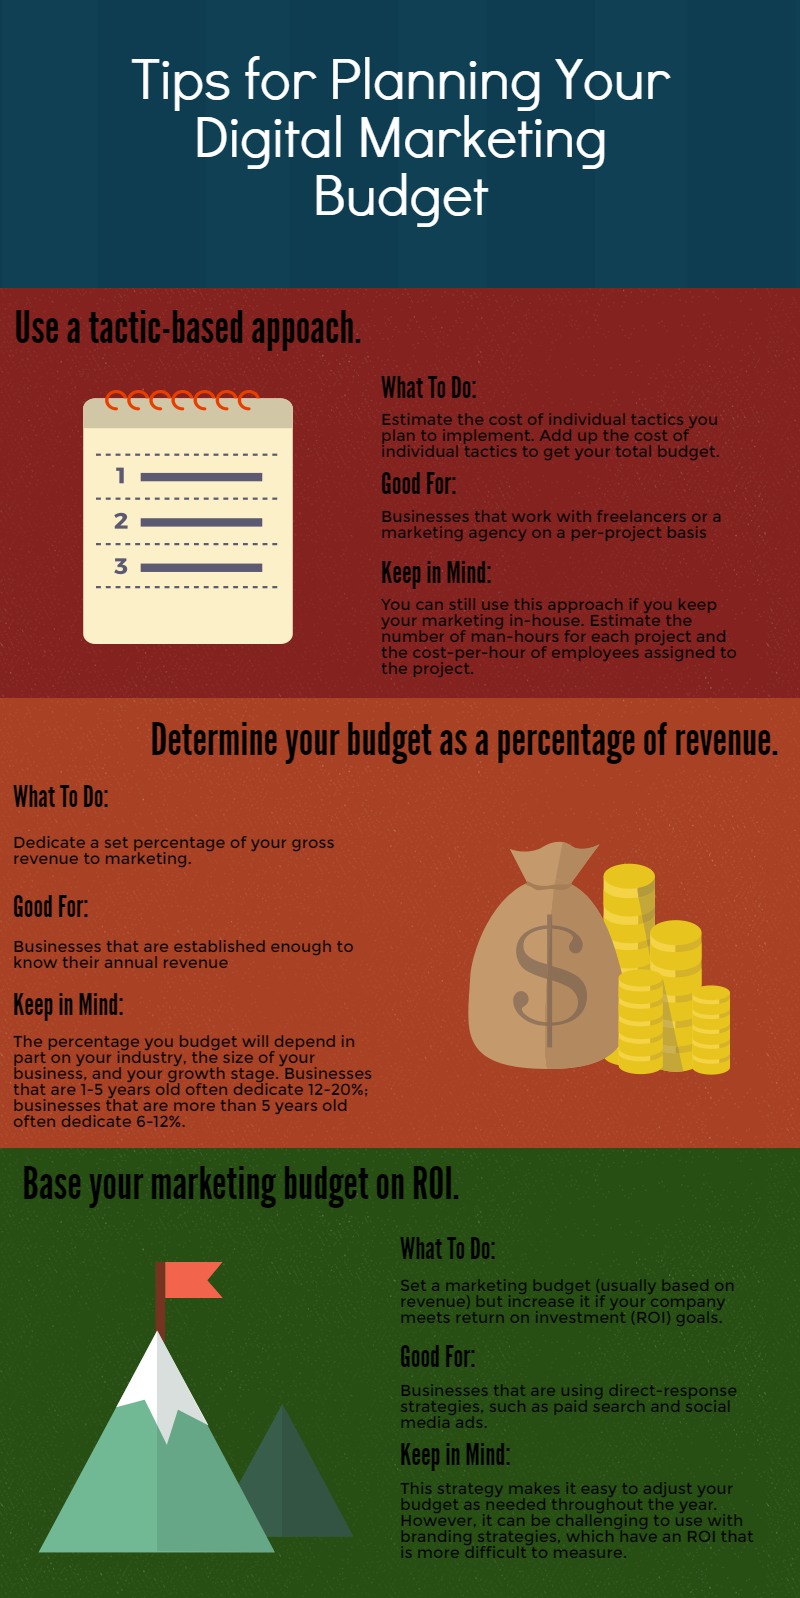 Maximizing Social Media Presence: A Freelancer's Guide to Effective Budgeting